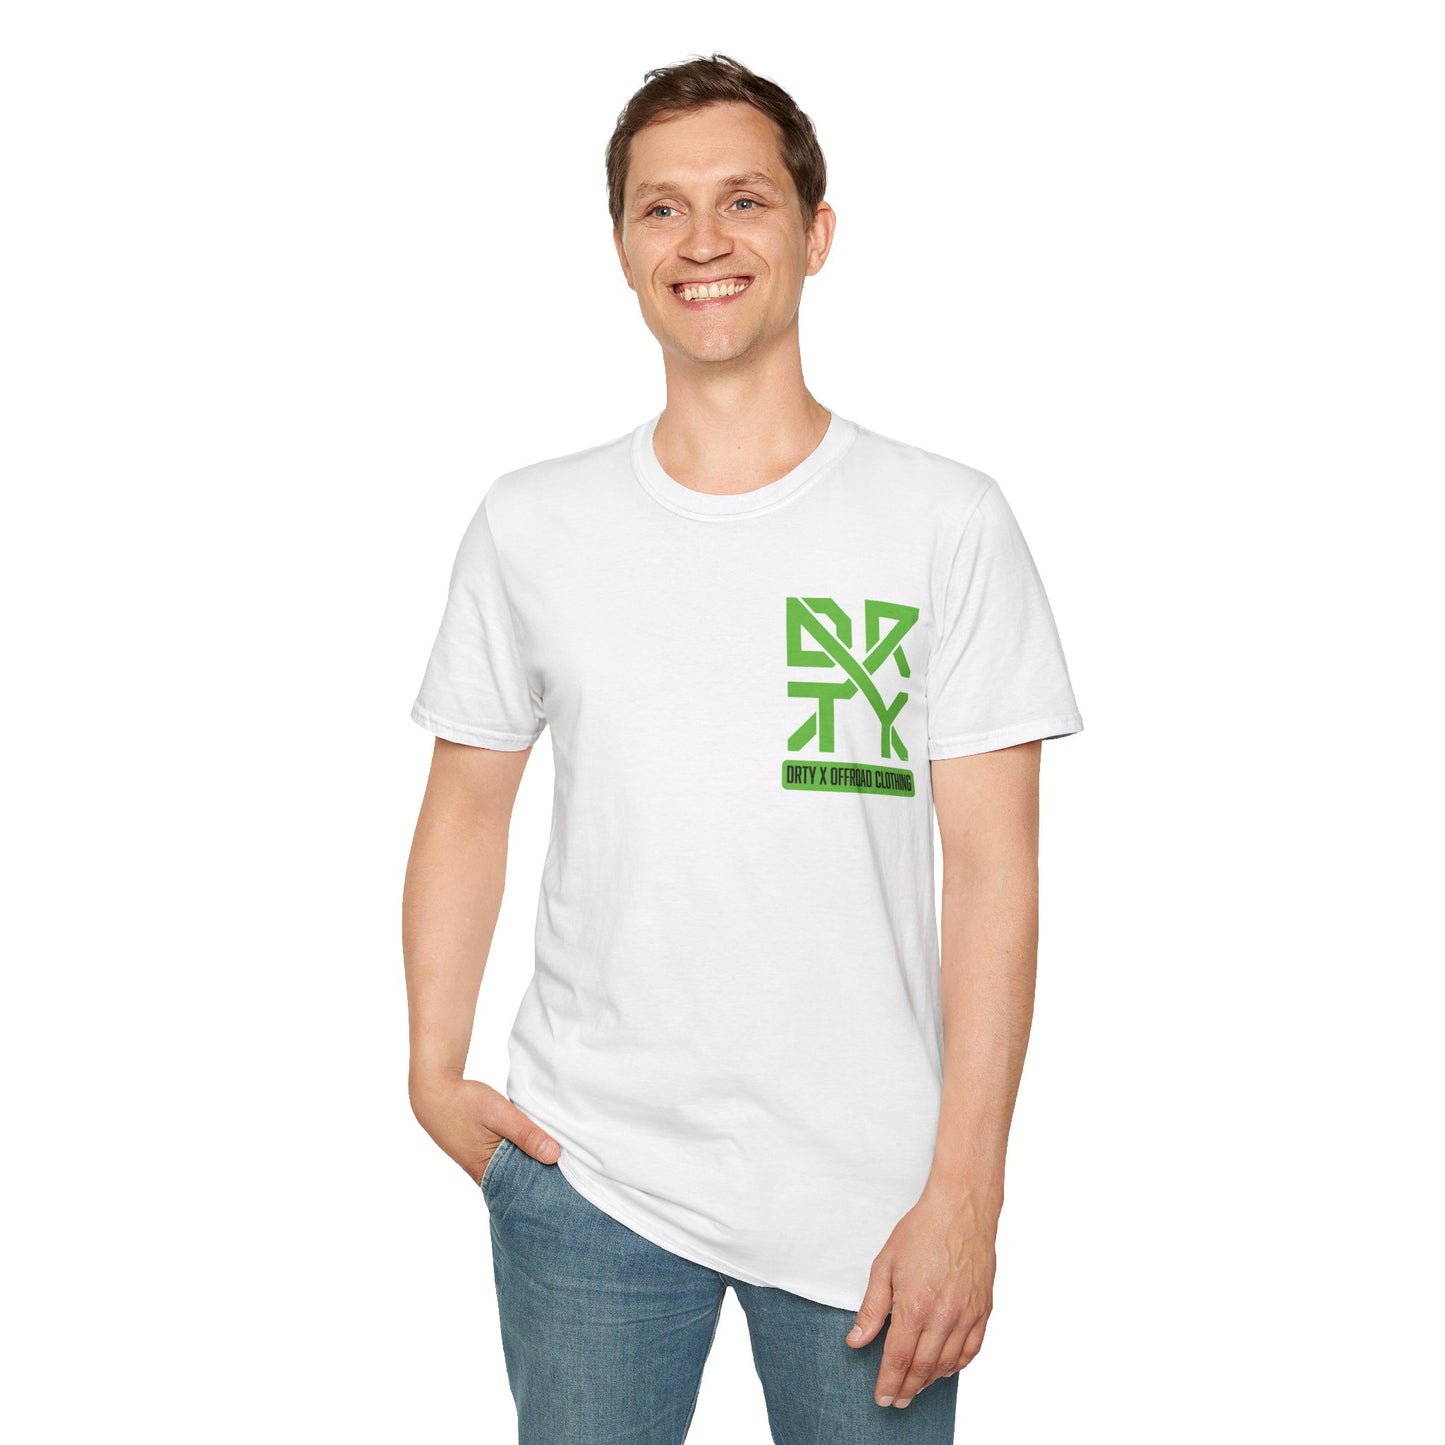 This image showcases a front view of a man wearing T-shirt with a left front chest with a DRTY X logo.